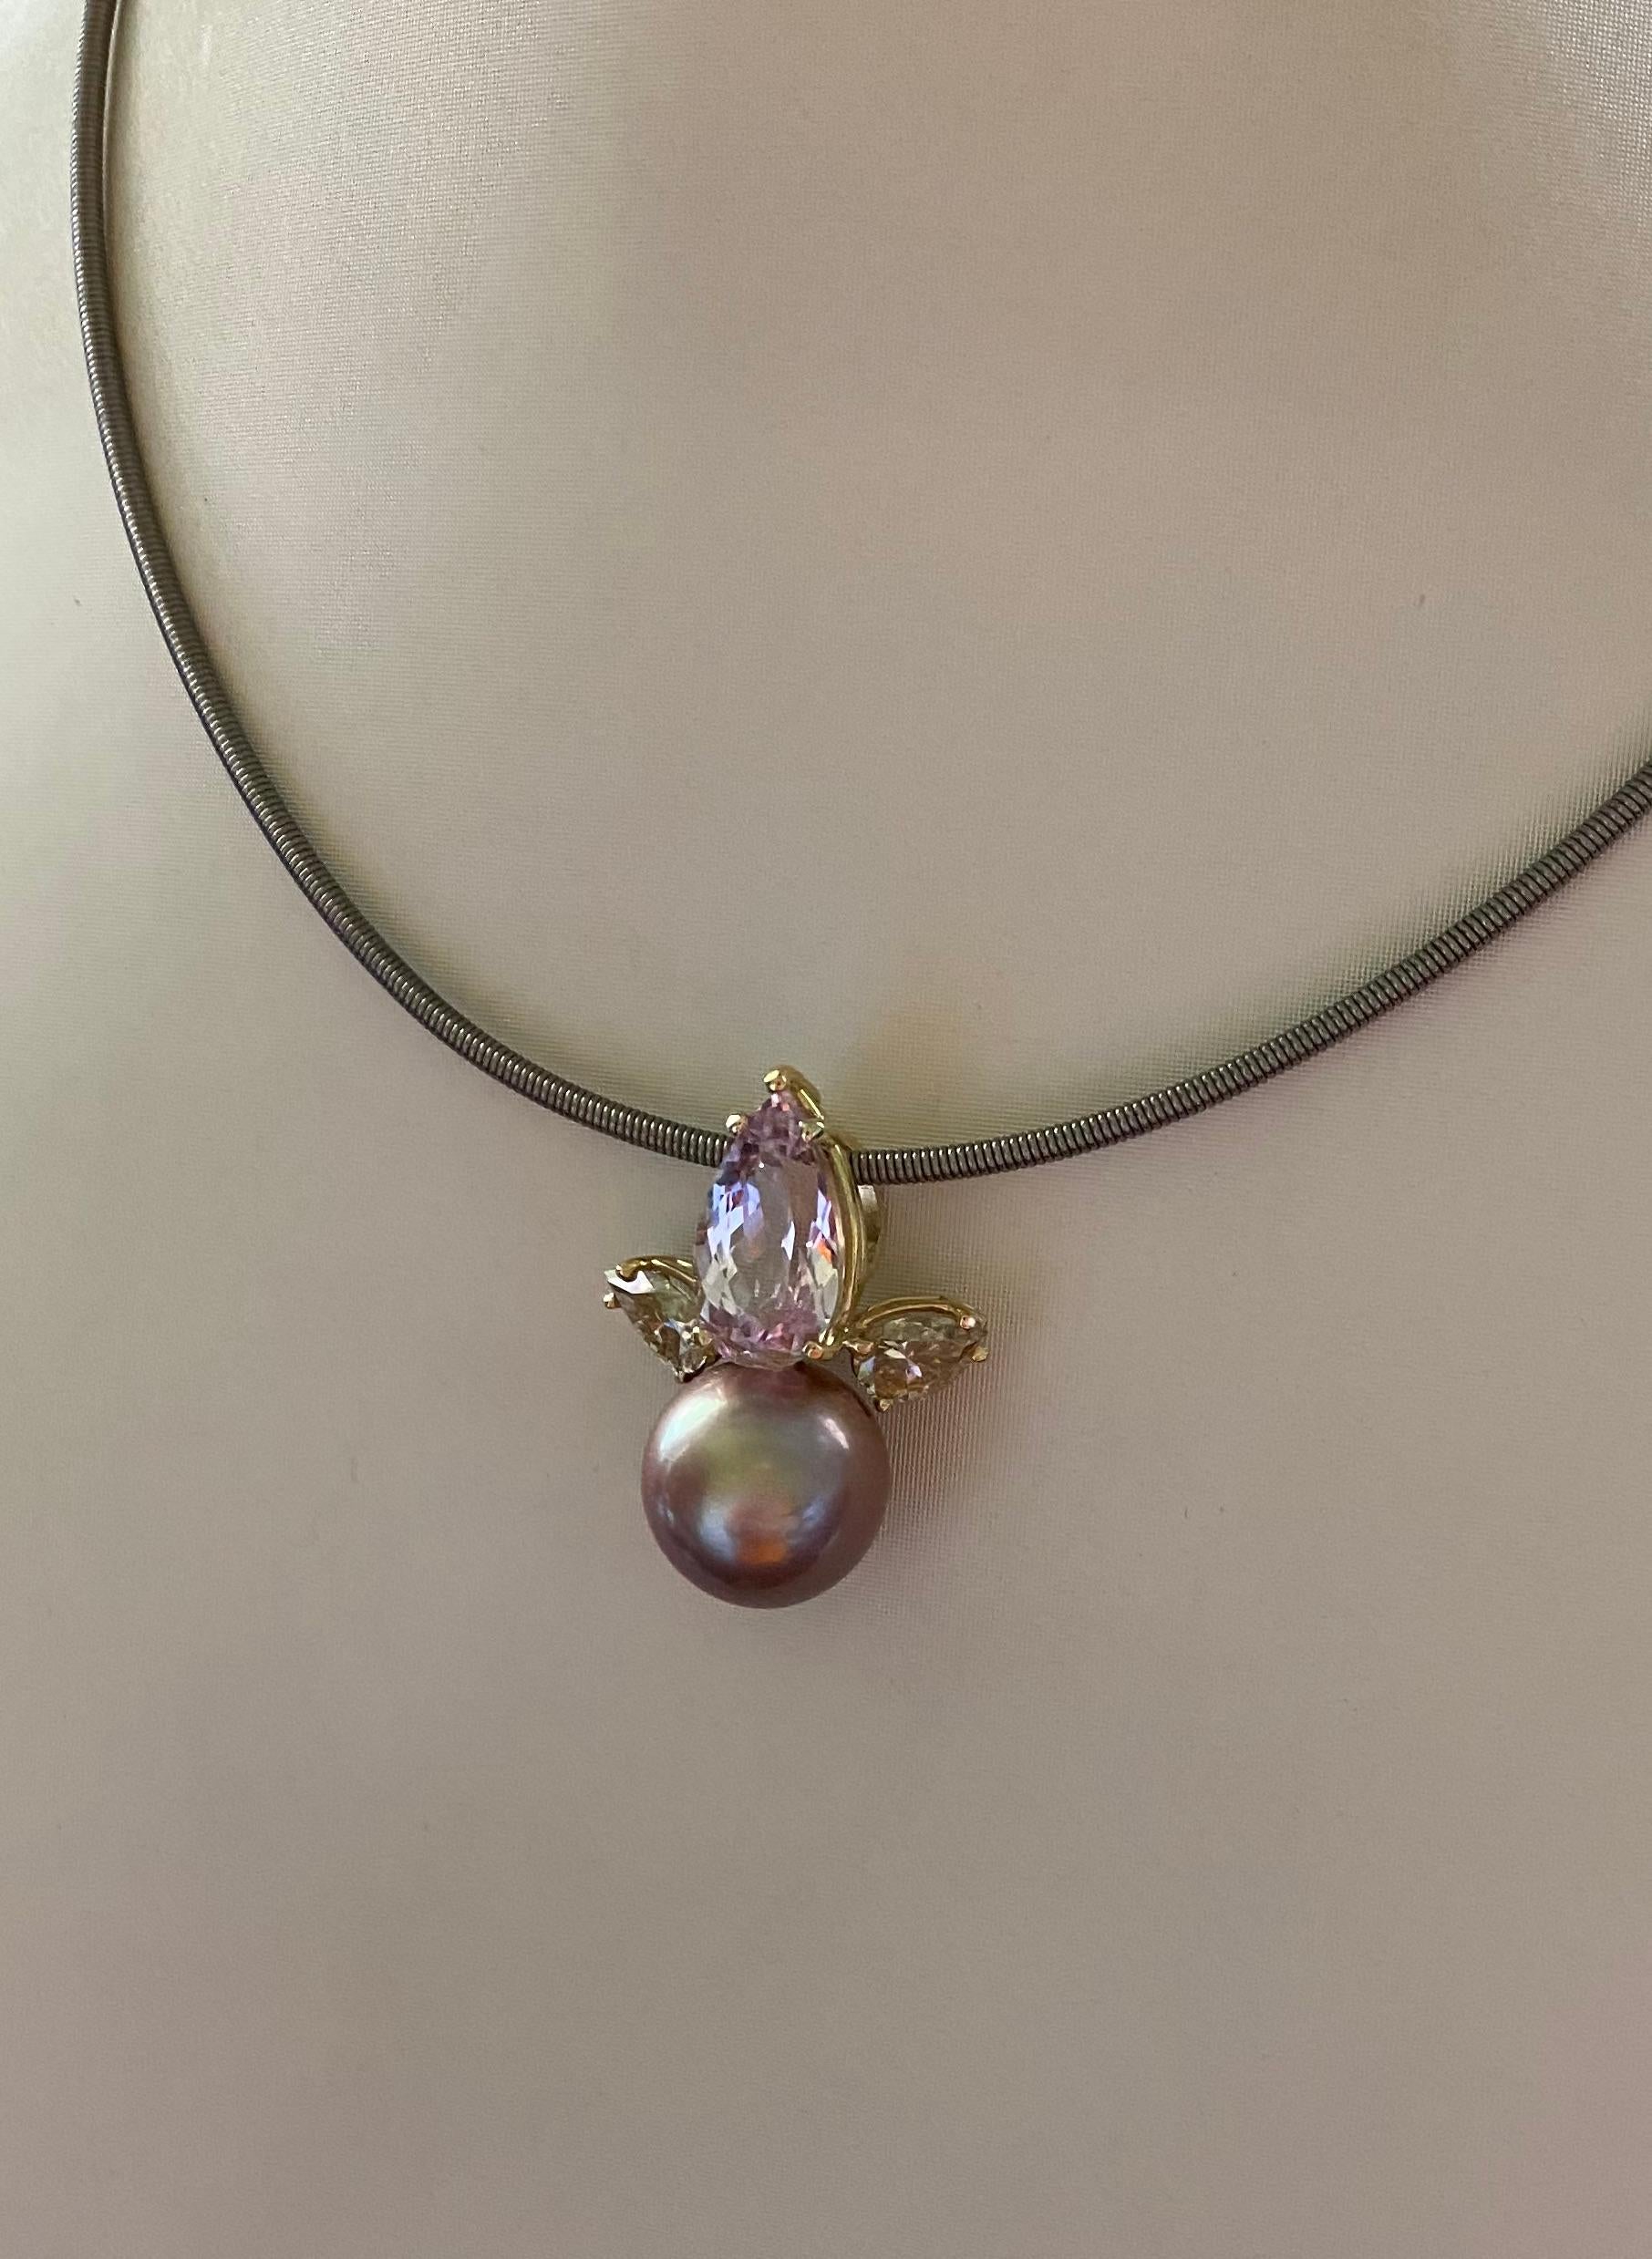 Kunzite, Tahitian pearl and champagne diamonds are showcased in this elegant pendant.  The kunzite (origin: Brazil) is a delicate orchid pink and fashioned as an elongated pear shape.  The gem is well cut and polished.  The kunzite is complimented